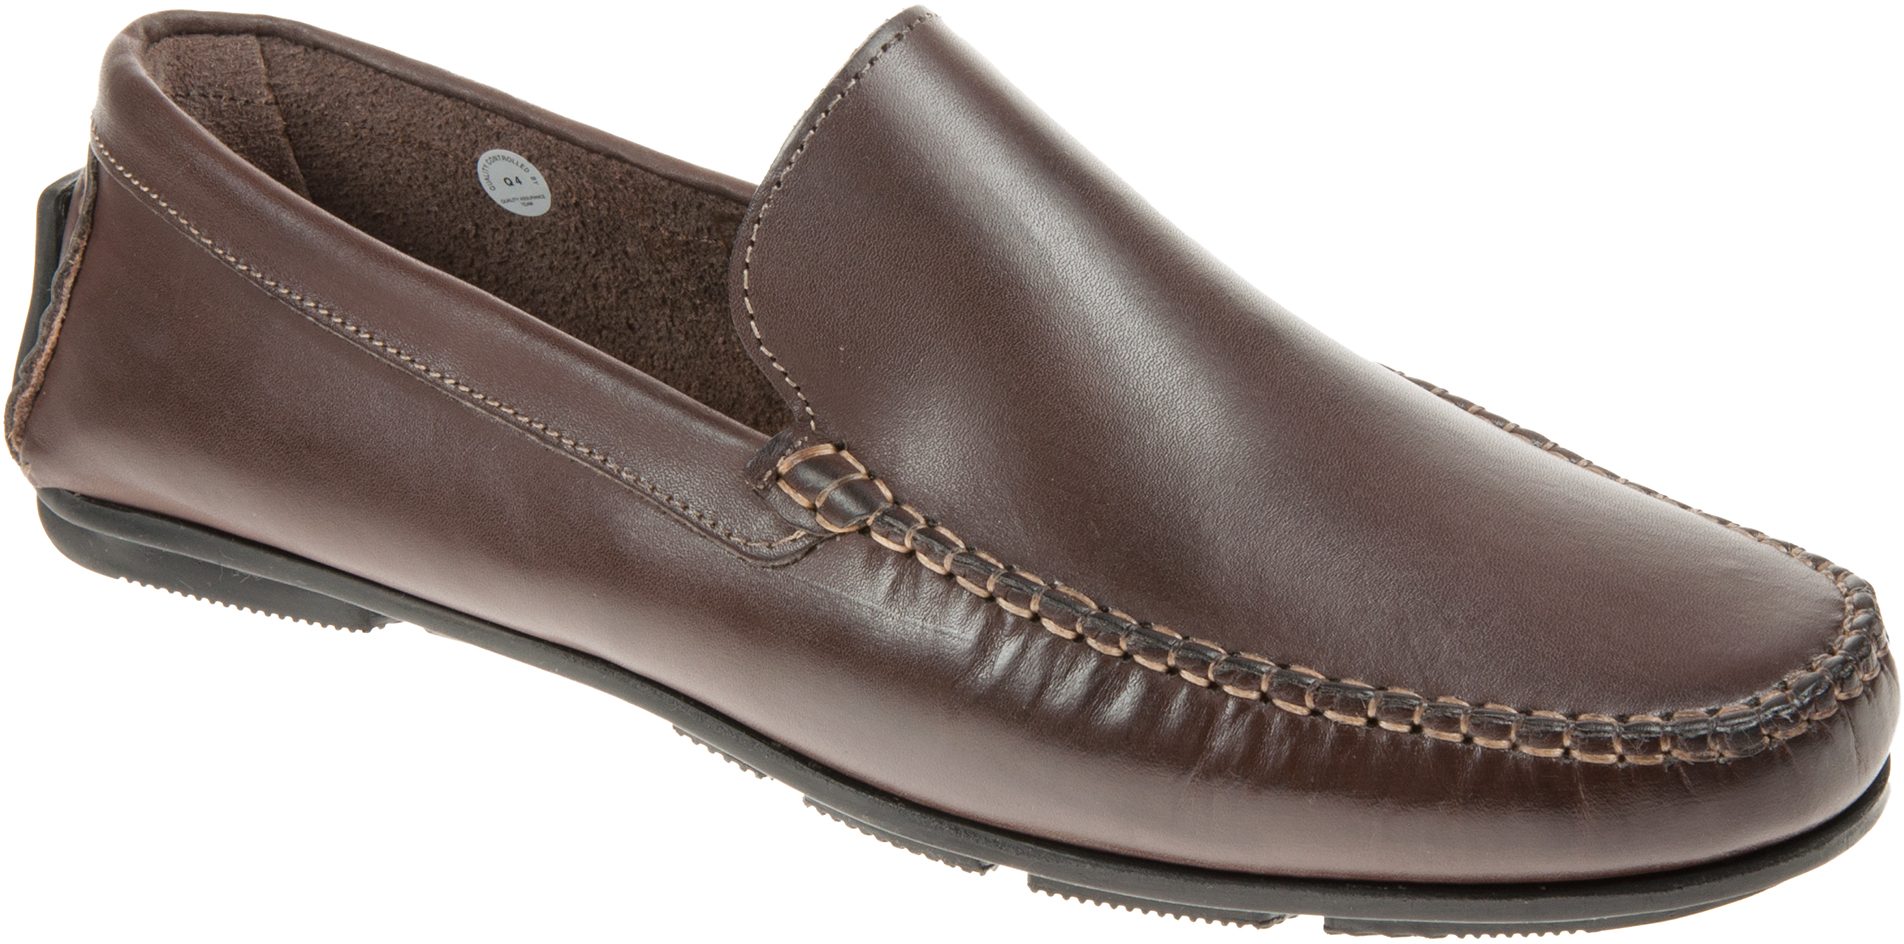 Catesby Thomas Brown 4611 - Casual Shoes - Humphries Shoes